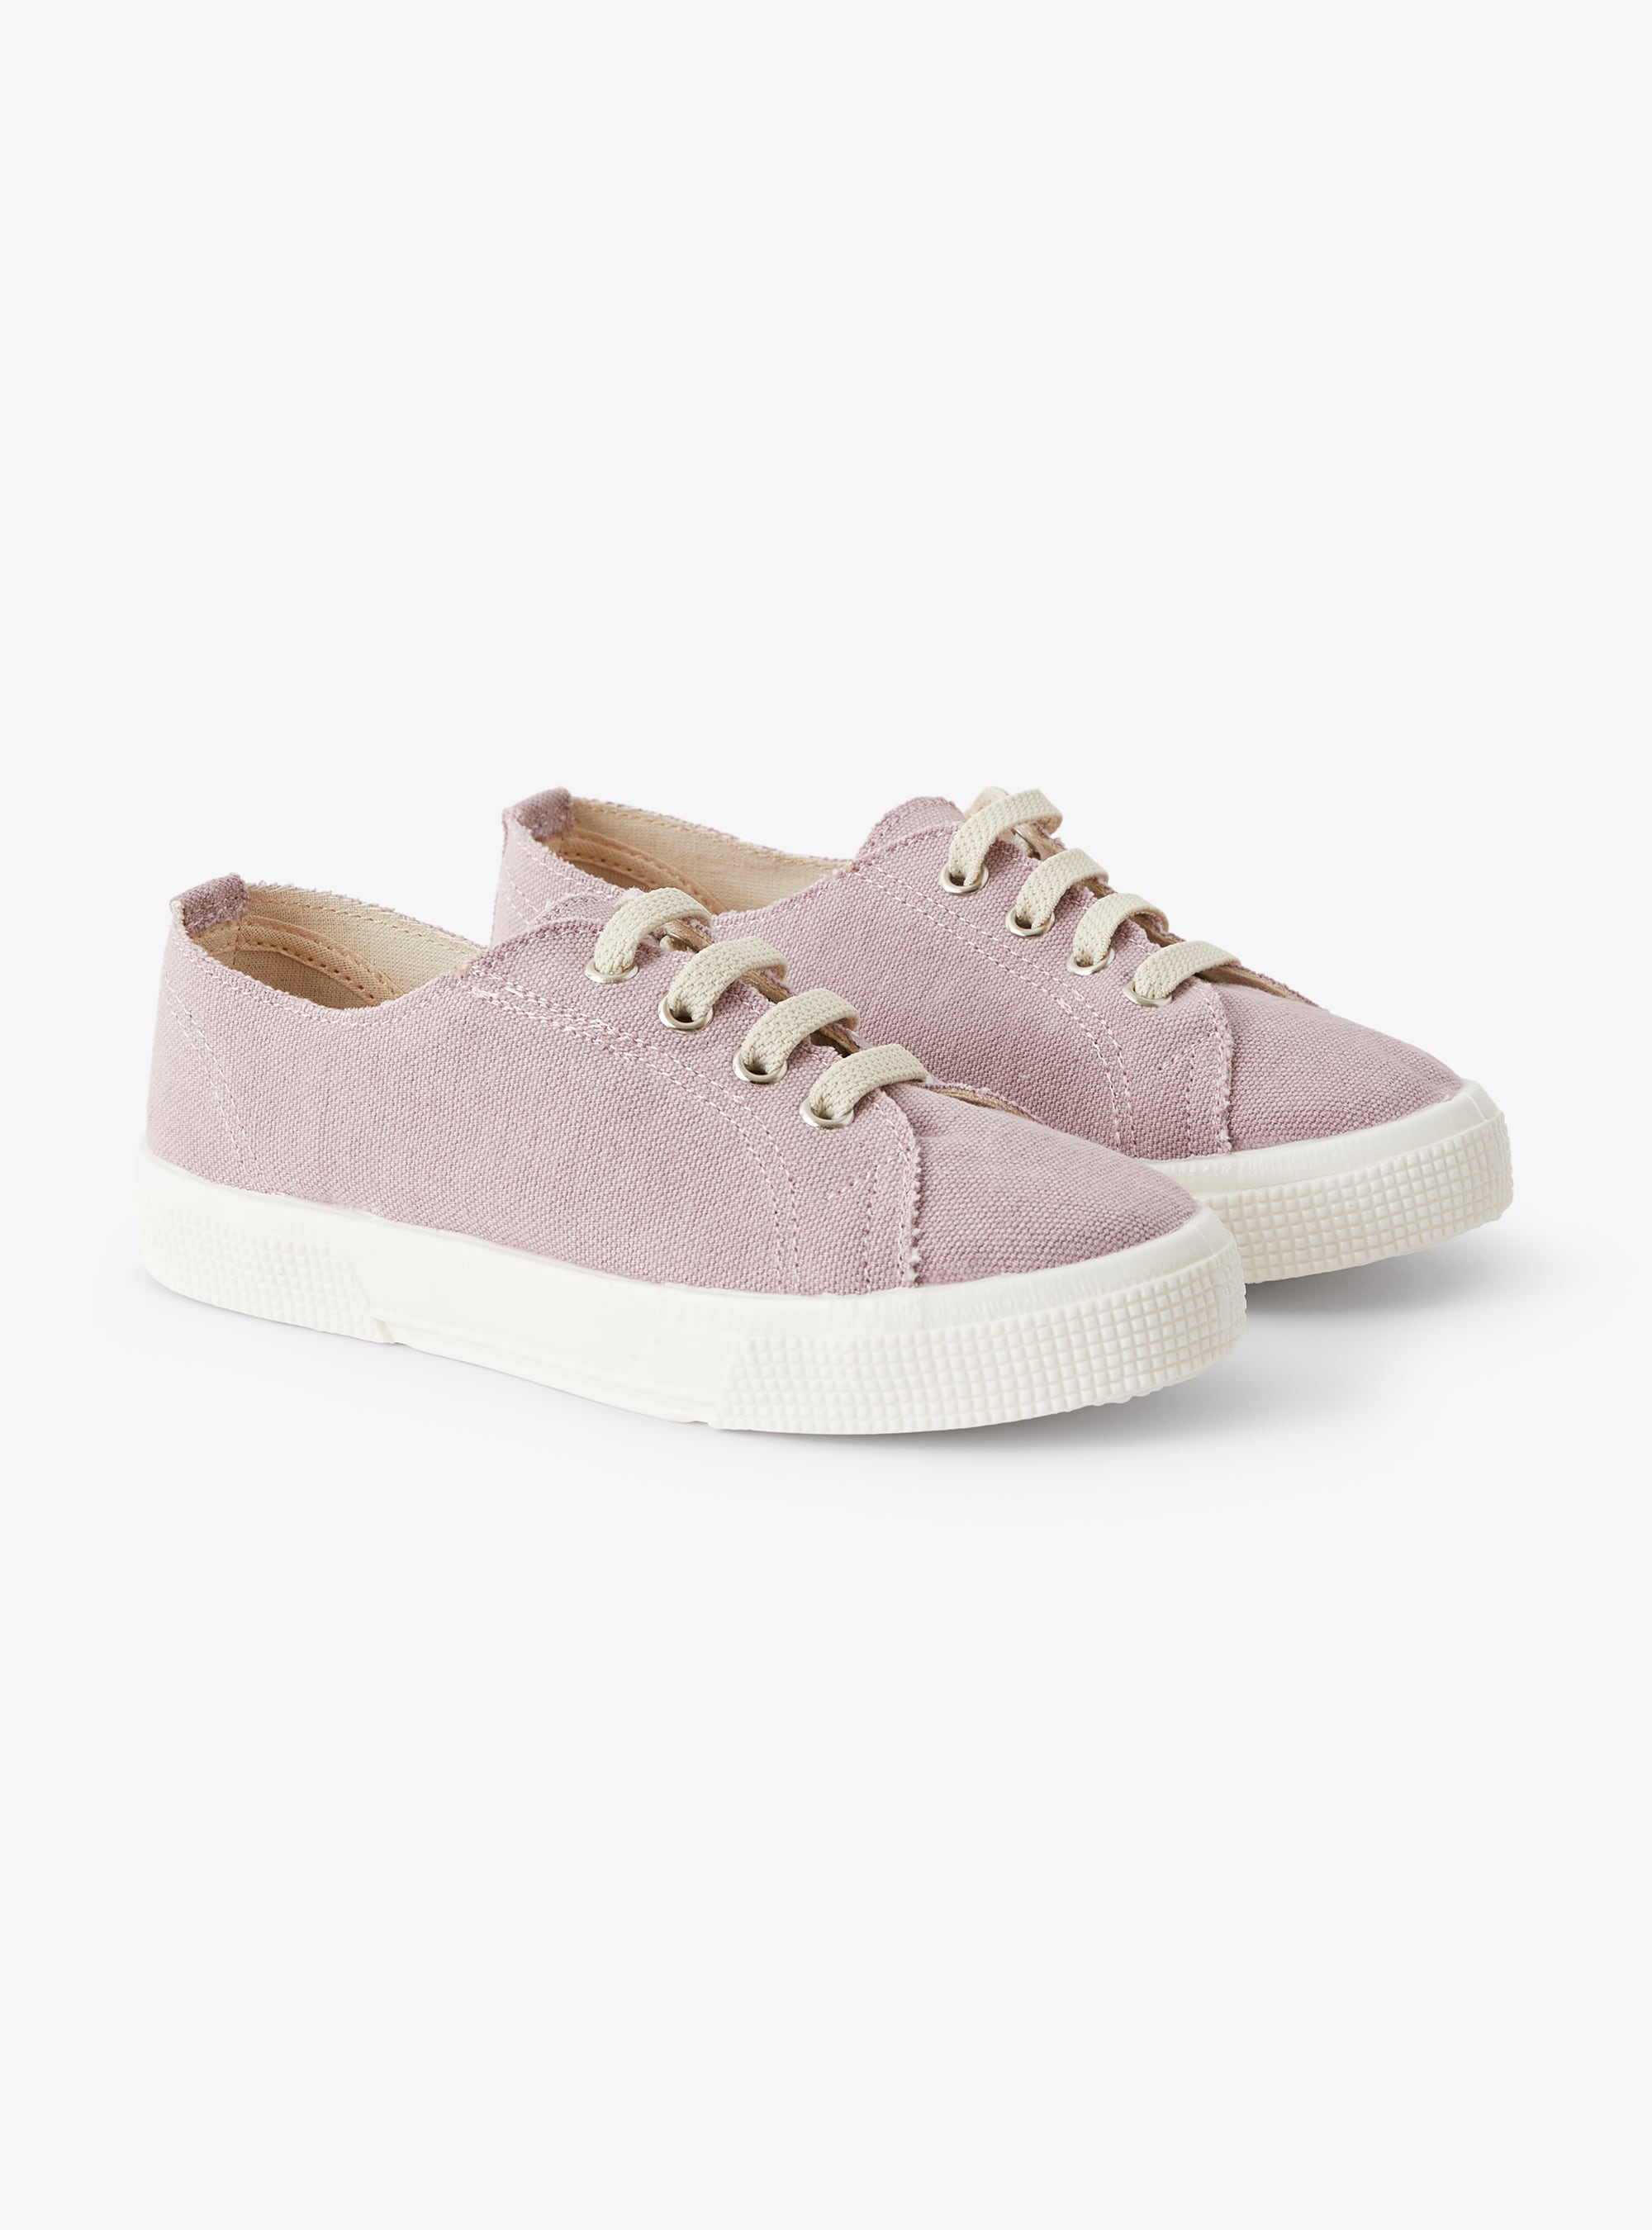 Sneaker in lilac canvas with laces - Shoes - Il Gufo